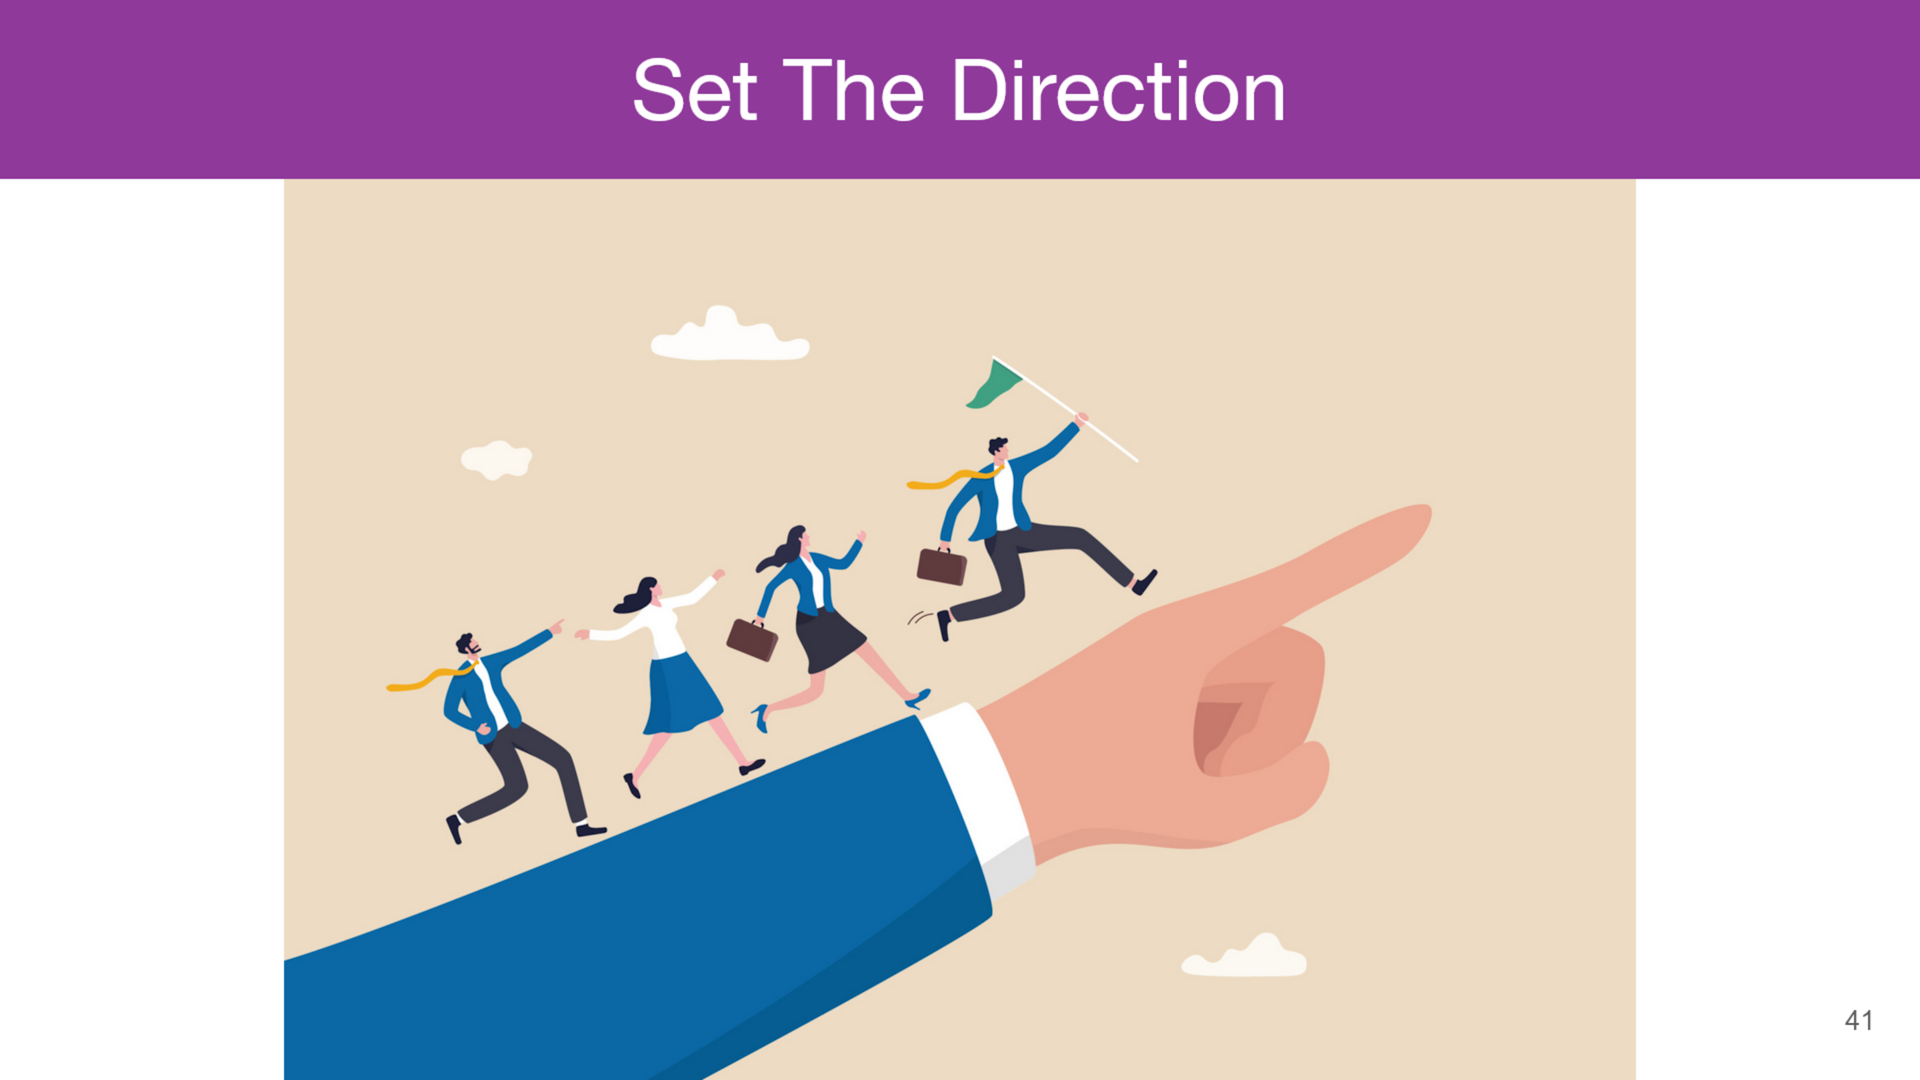 How To Be An Effective Tech Lead [Part 11] - Set The Direction